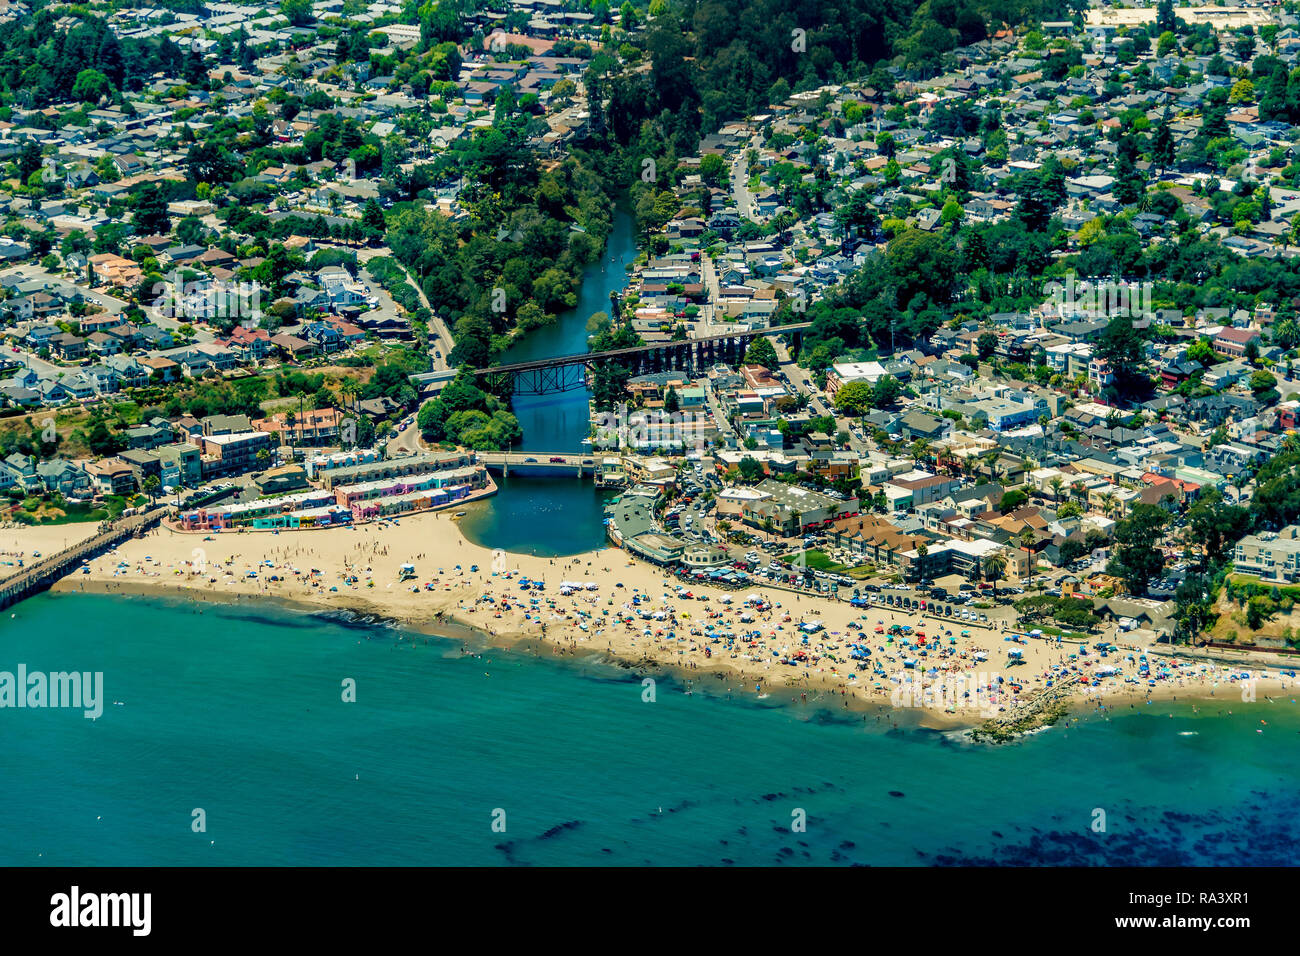 The aerial view of the beach with tourists in the city of Capitola in Northern California, close to the city of Santa Cruz. Stock Photo